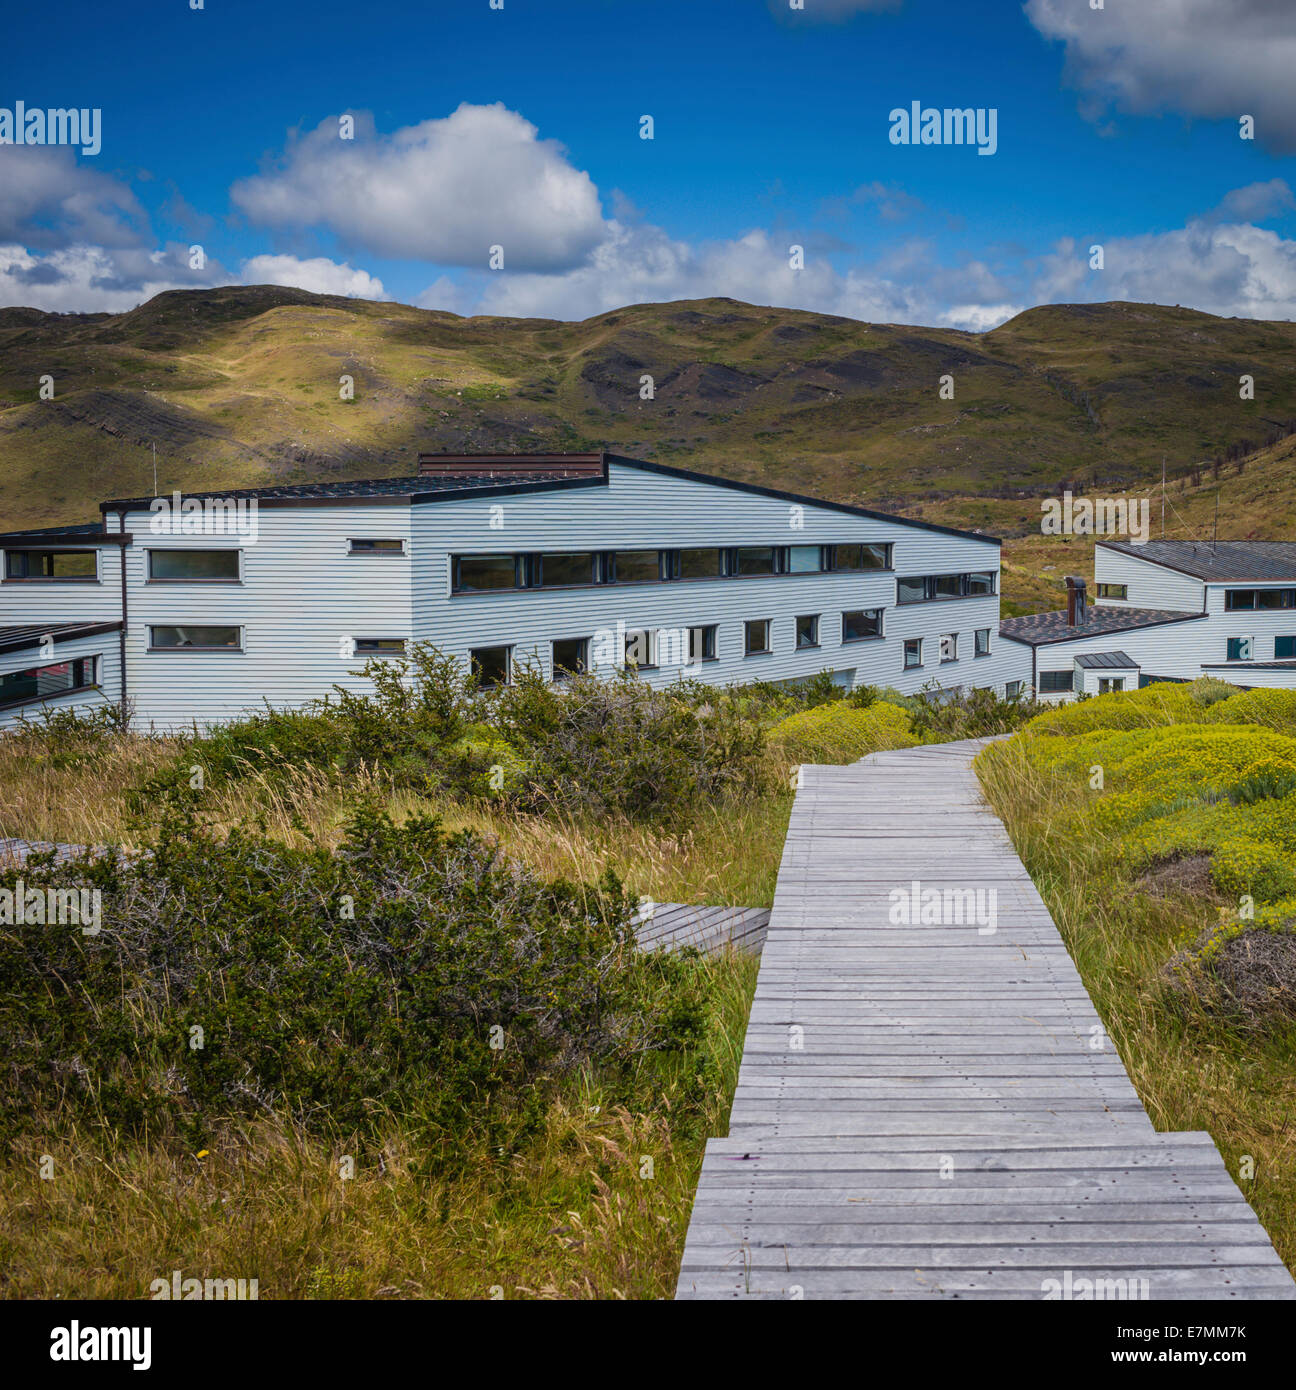 Explora Hotel in Torres del Paine national park, Patagonia, Chile. Stock Photo